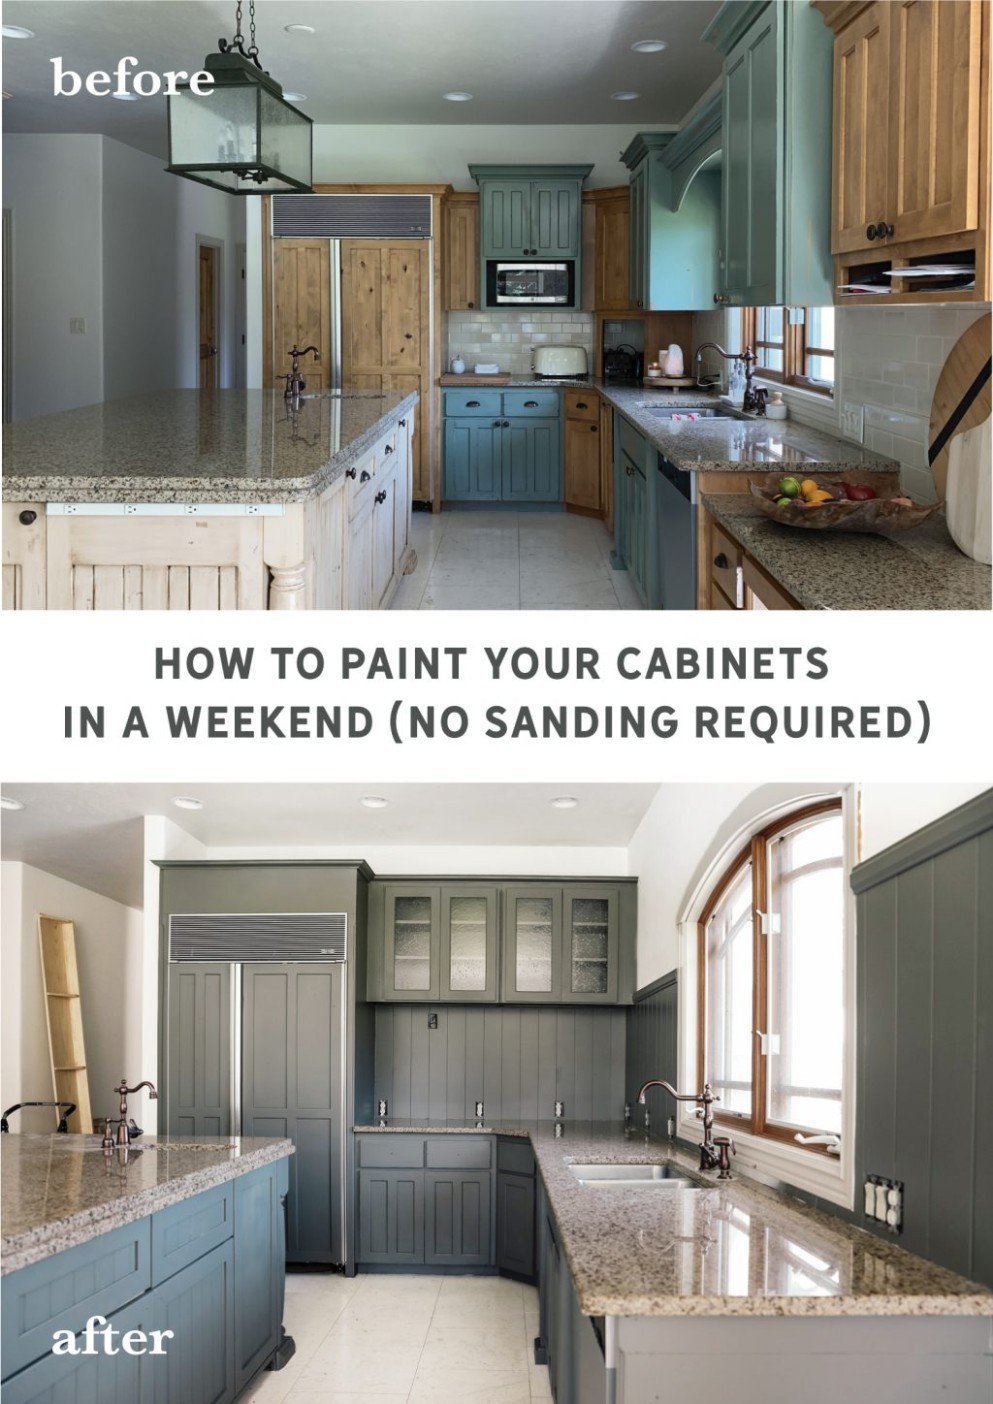 HOW TO PAINT YOUR CABINETS IN A WEEKEND (WITHOUT SANDING THEM  - do you have to prime cabinets before painting?